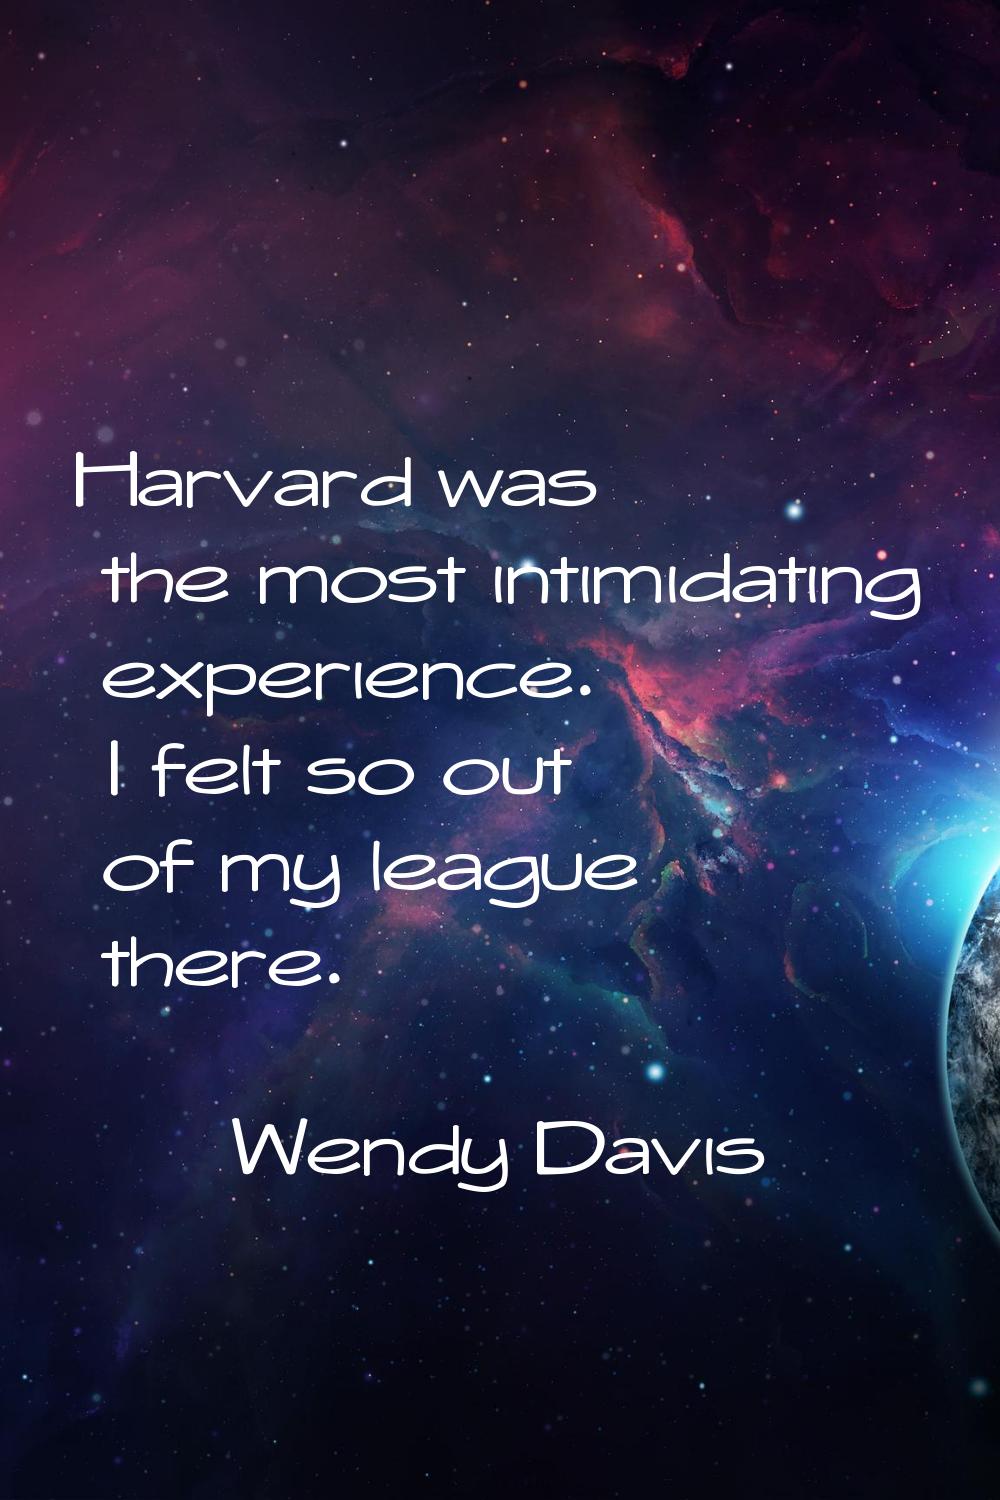 Harvard was the most intimidating experience. I felt so out of my league there.